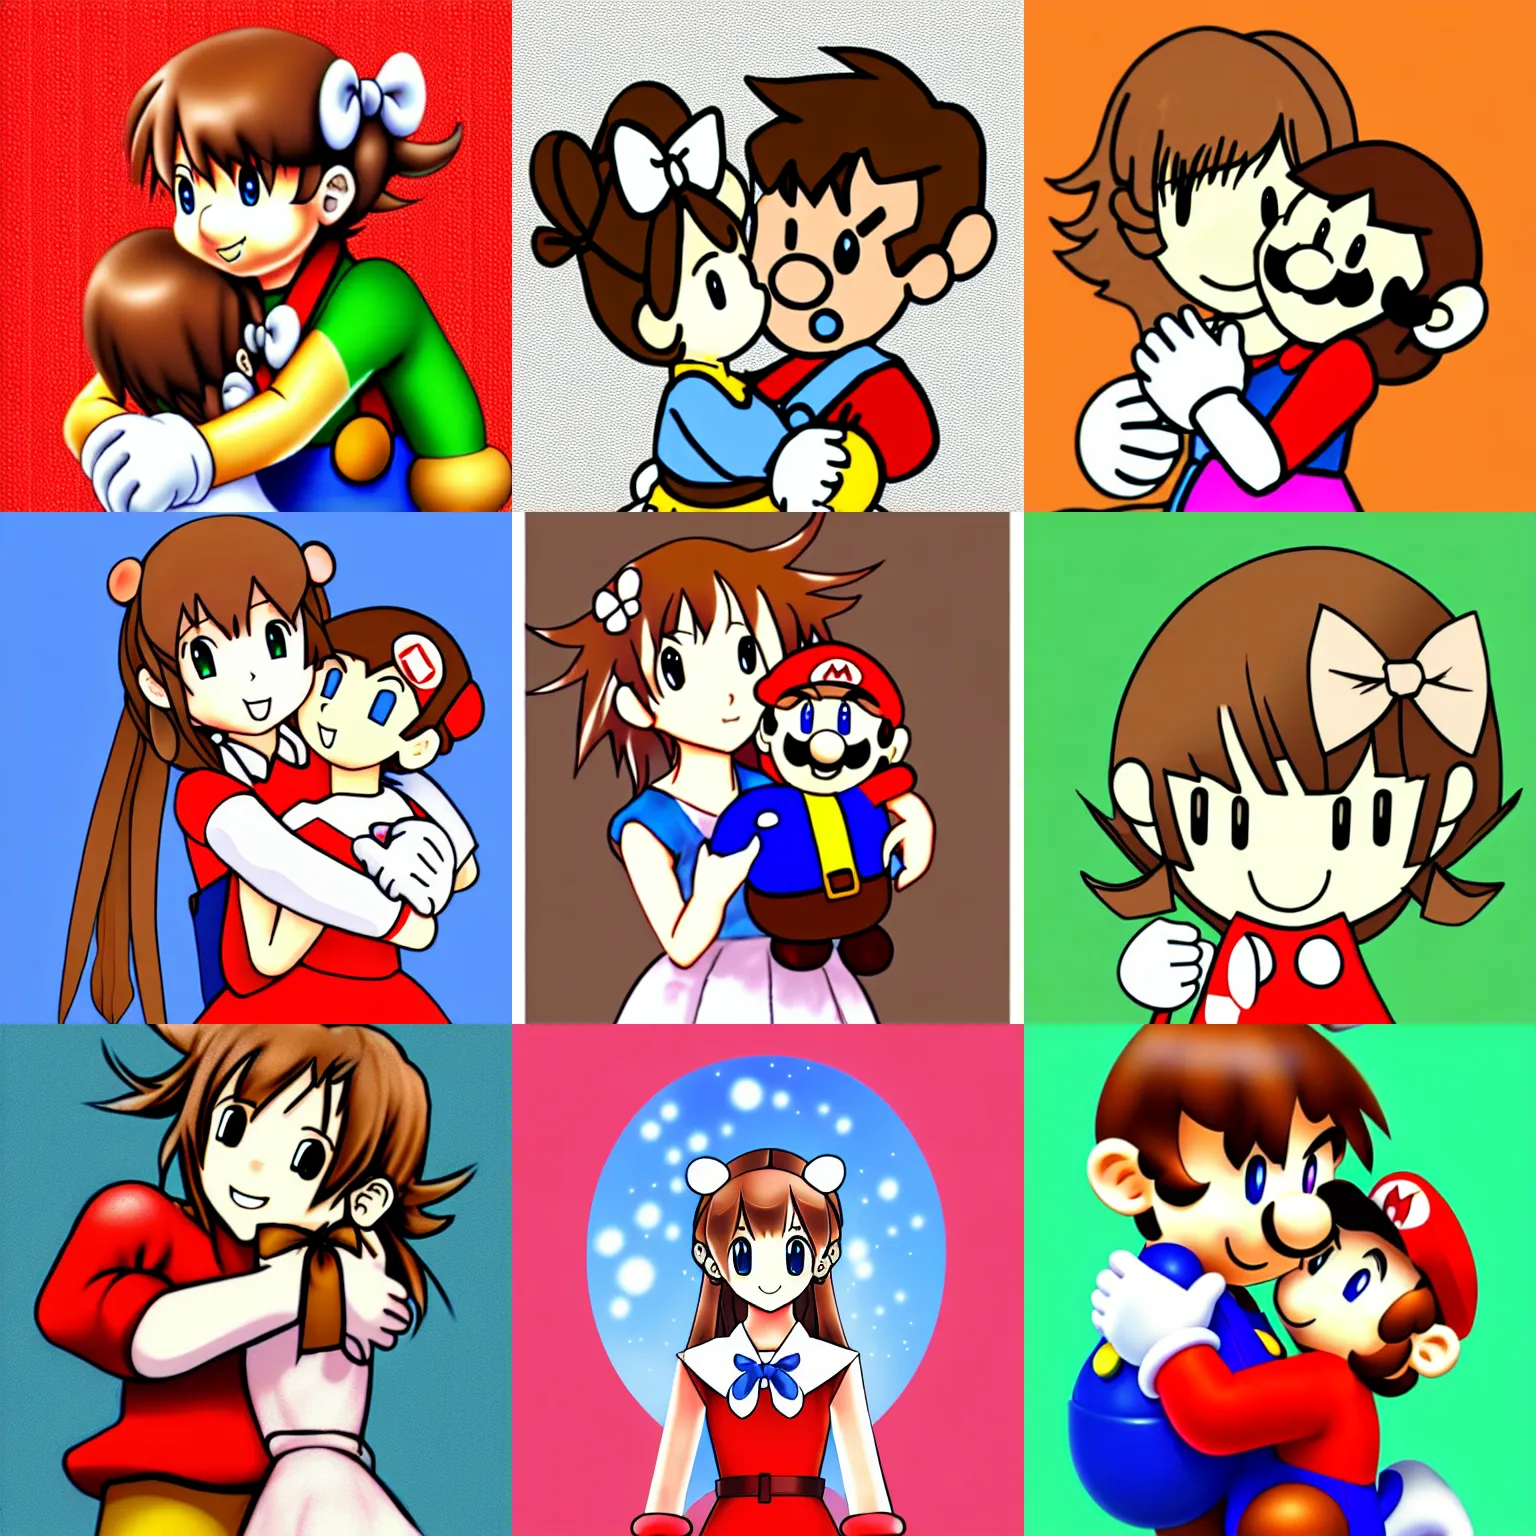 Prompt: cute light - brown haired anime girl with a bow in her hair hugging super mario, amateur digital art